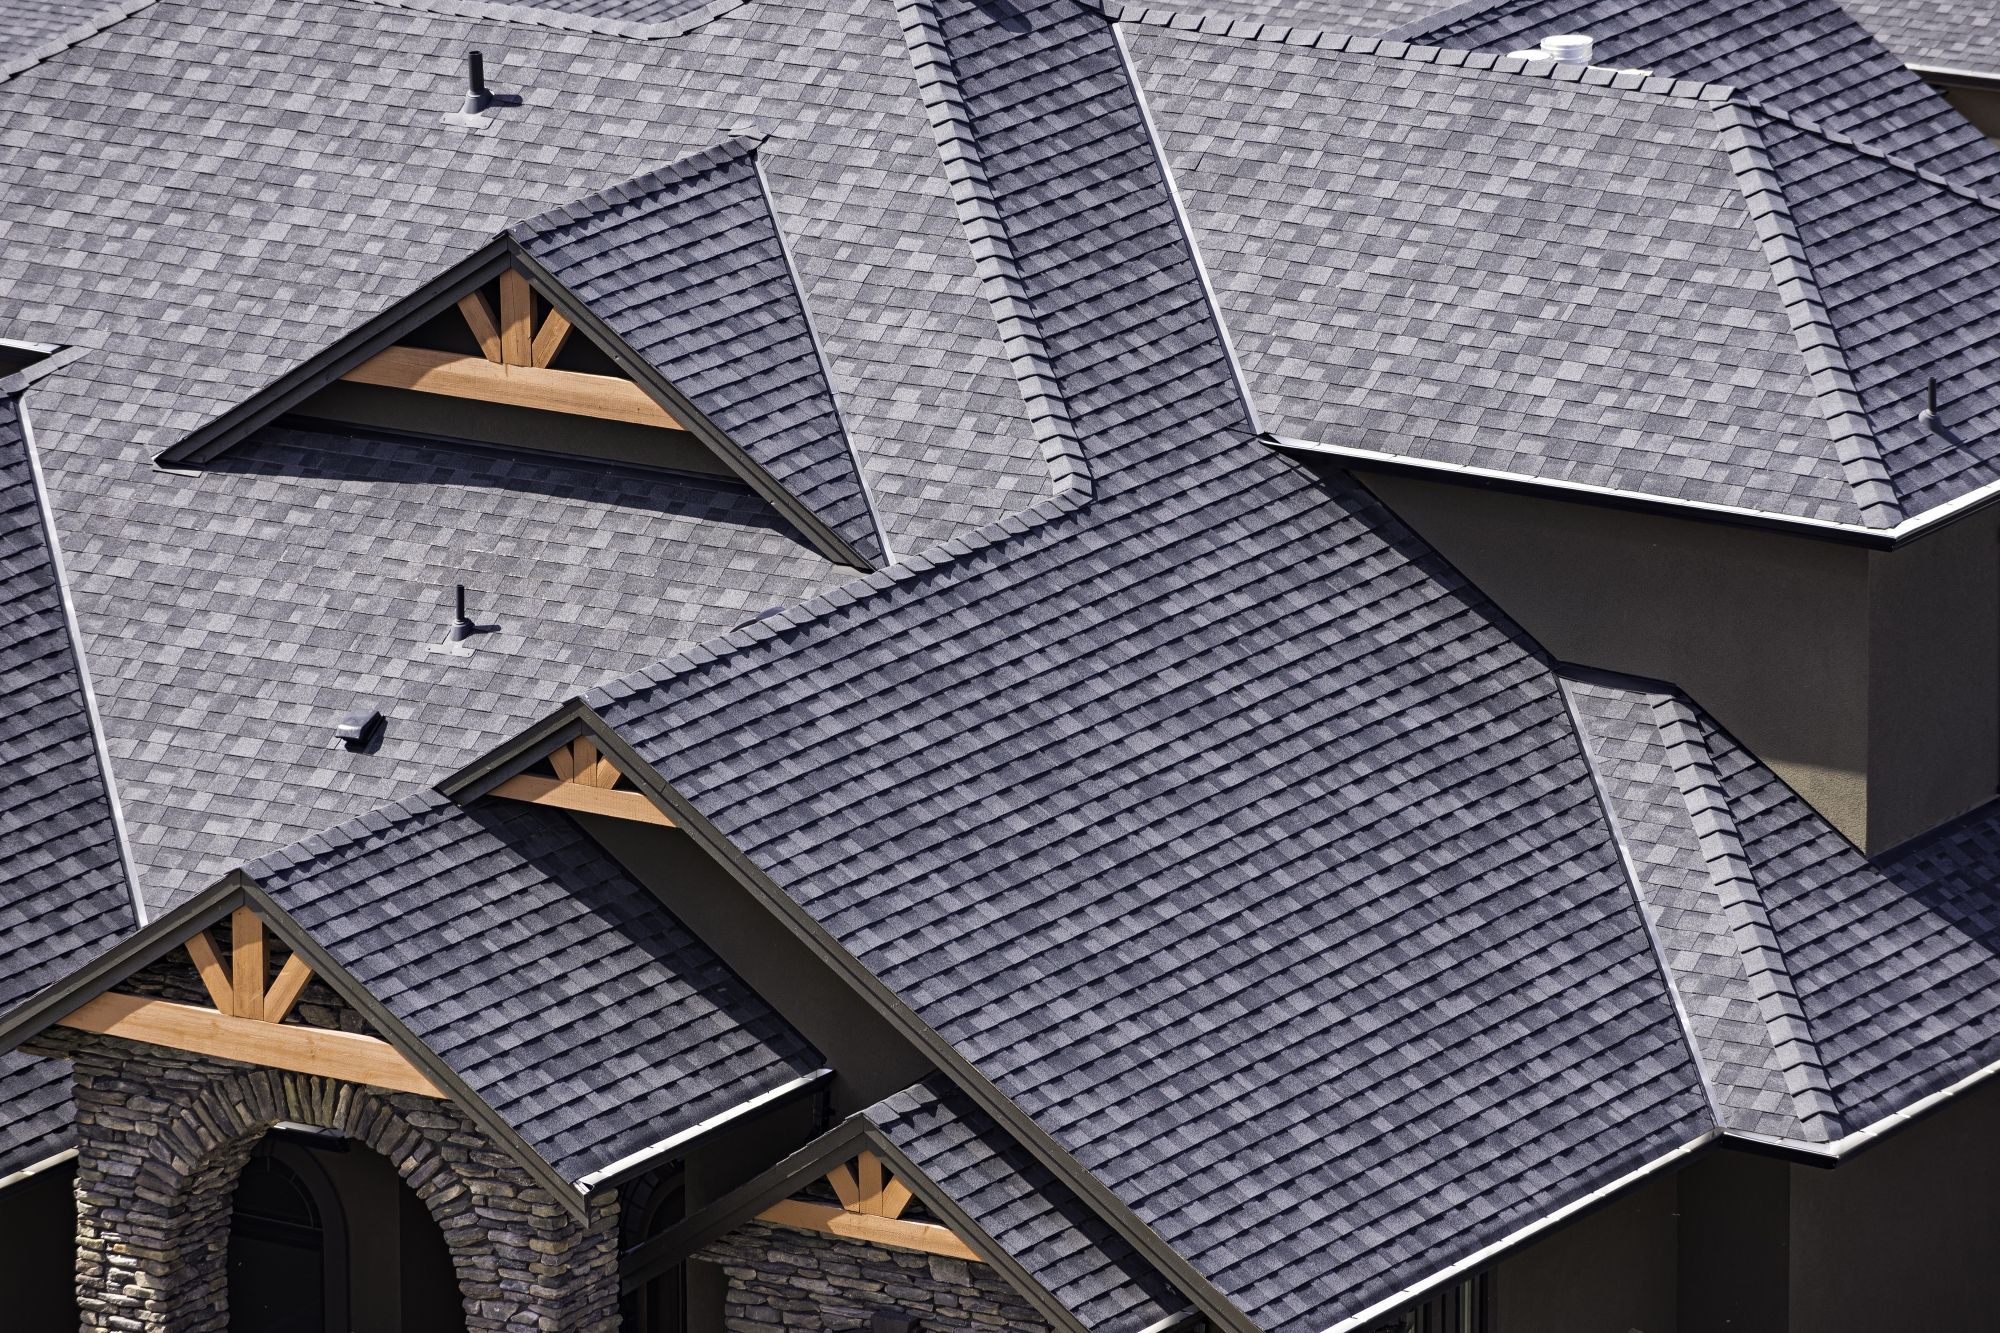 Aerial view of a home with asphalt shingle roofing